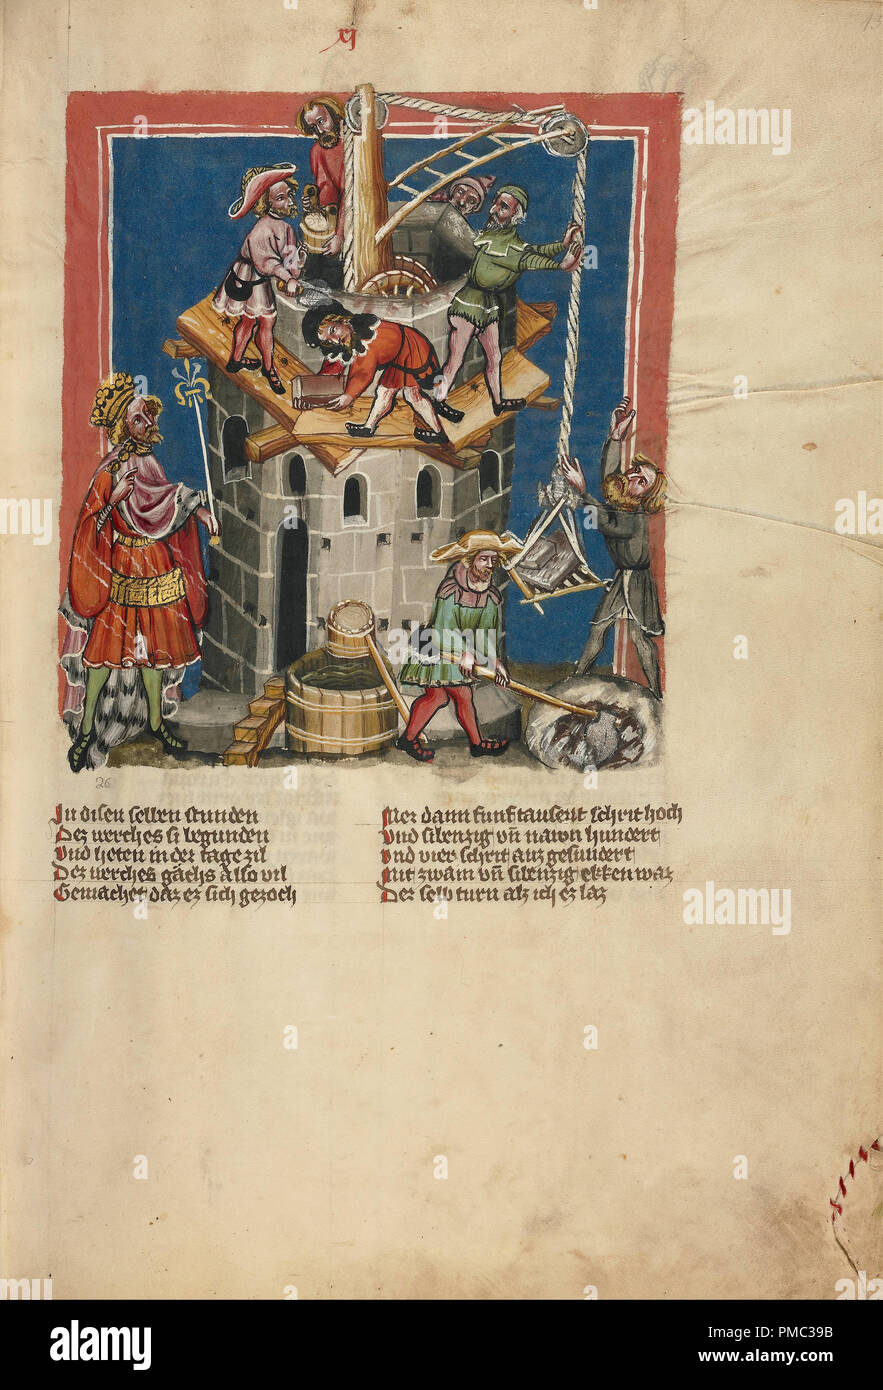 The Construction of the Tower of Babel. Date/Period: Ca. 1400 - 1410 with addition in 1487. Folio. Tempera colors, gold, silver paint, and ink on parchment. Height: 335 mm (13.18 in); Width: 235 mm (9.25 in). Author: UNKNOWN. Stock Photo